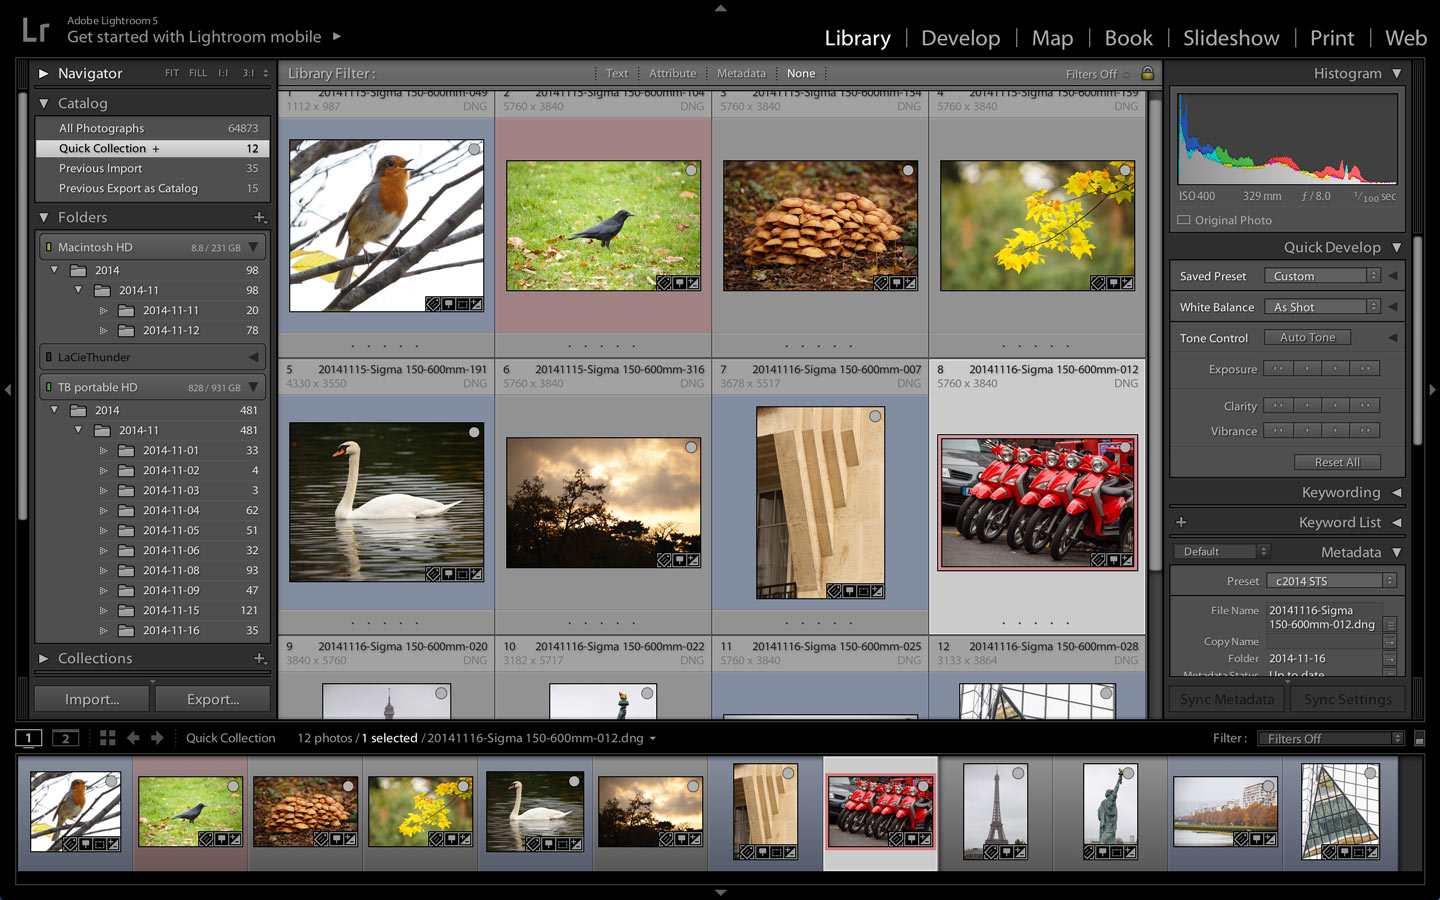 Lightroom 5.7 lets people organize and edit photos.